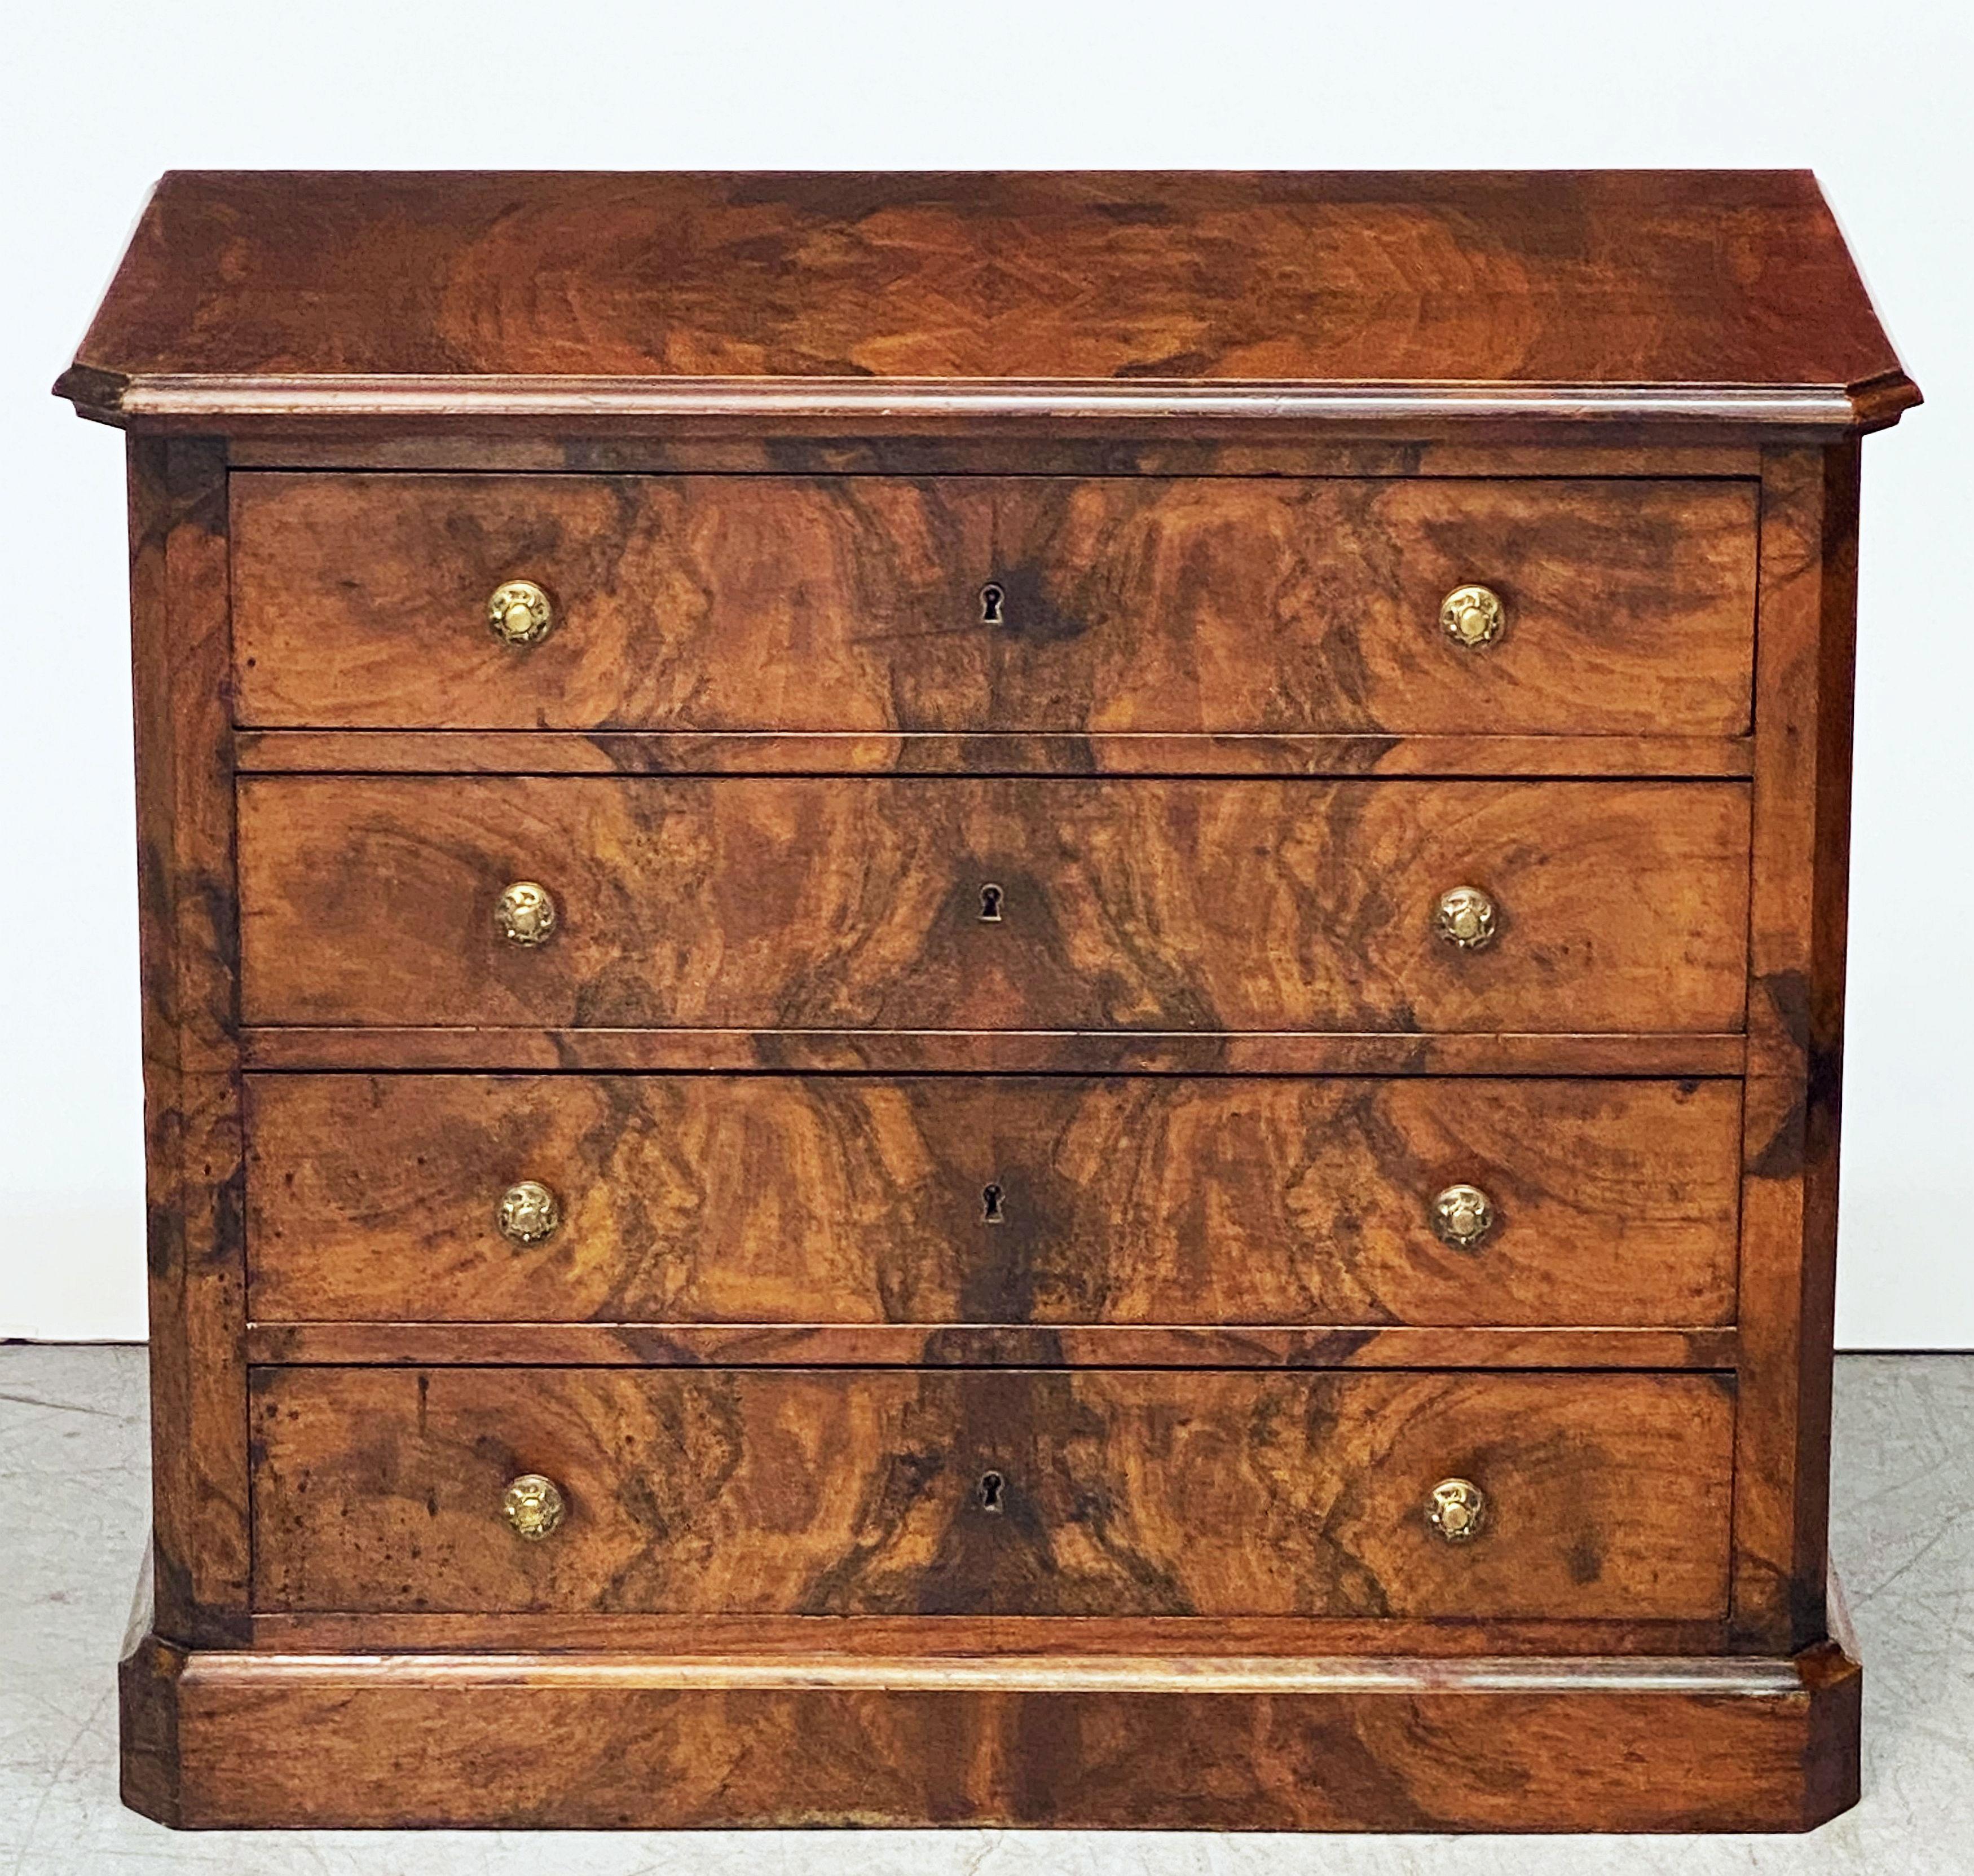 A fine French commode or chest of drawers featuring lovely flame walnut veneers on the front, sides and top.
With four drawers, each drawer with two decorative brass knob pulls, and resting on a raised plinth base.
    